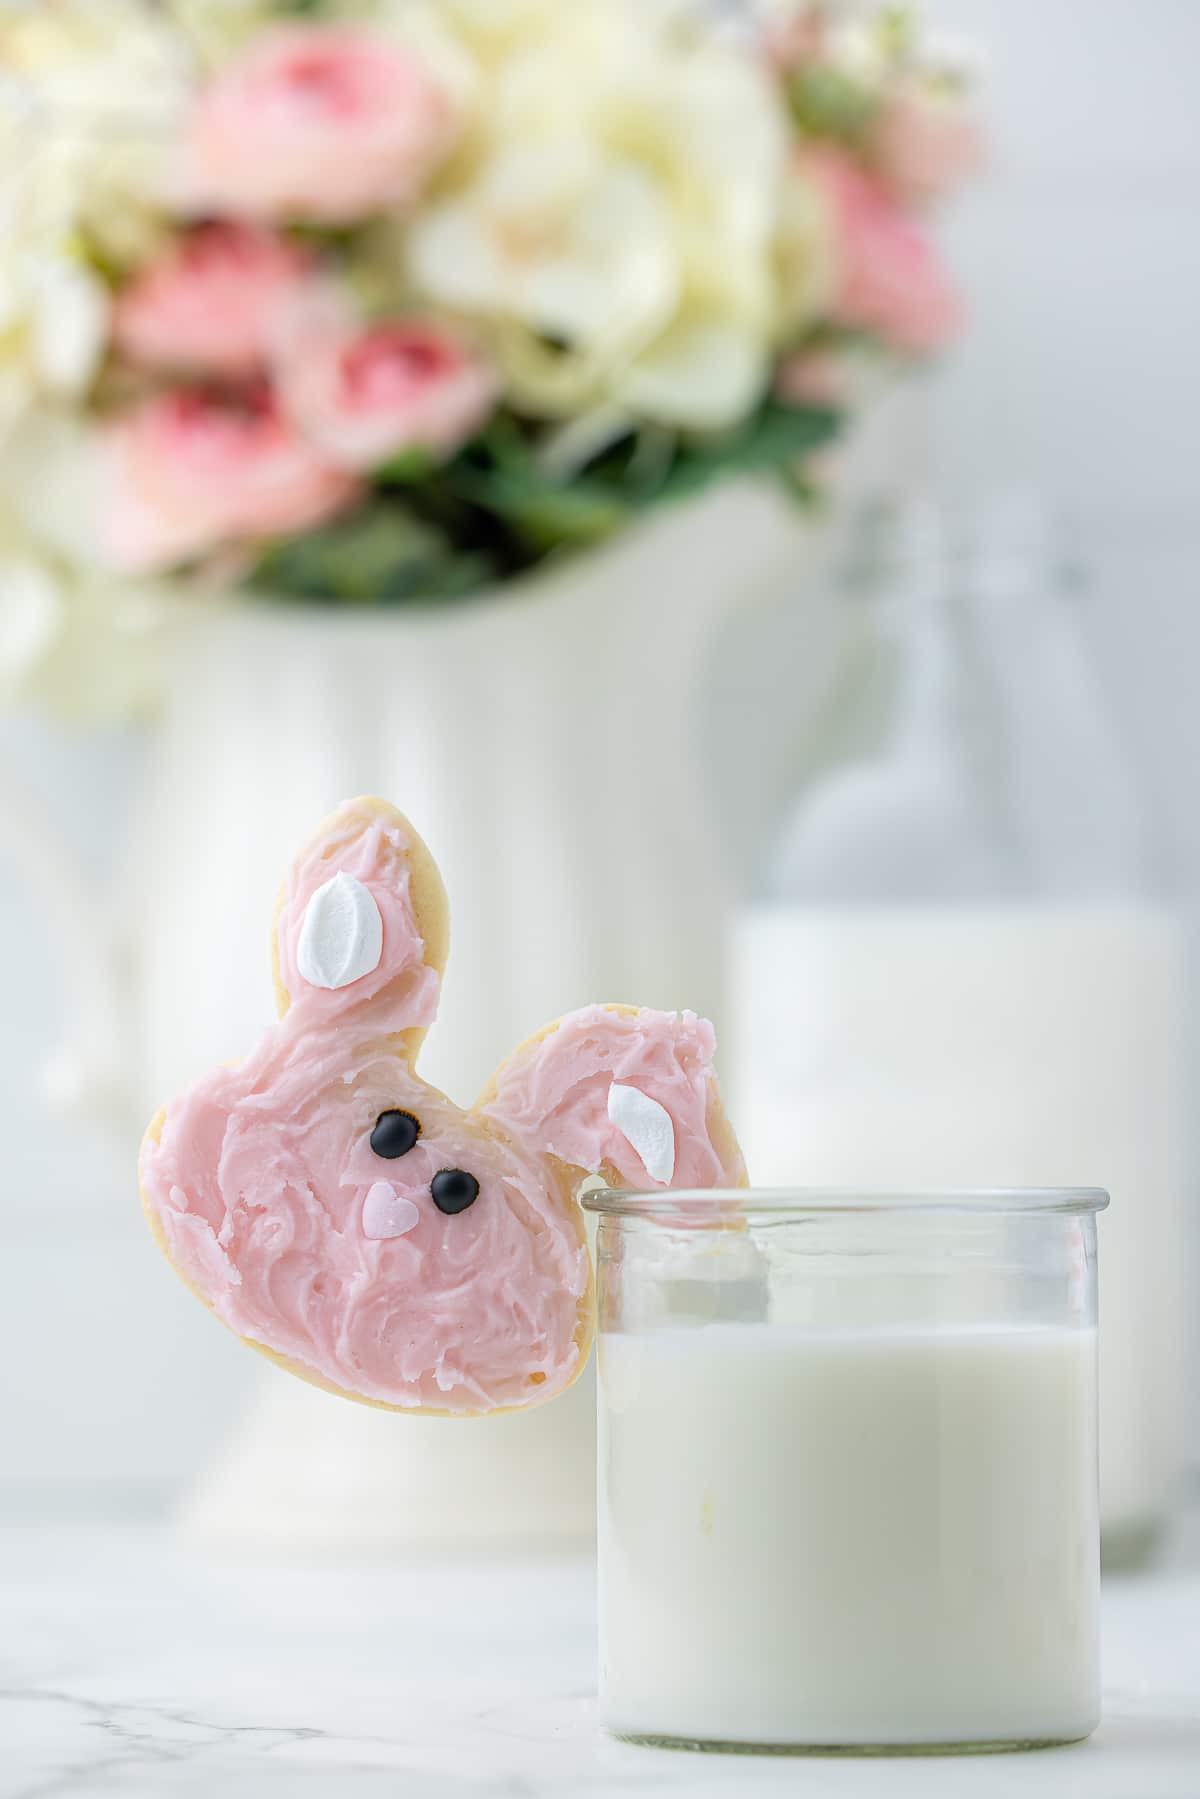 Easter bunny sugar cookie with ear hooked on to side of glass of milk